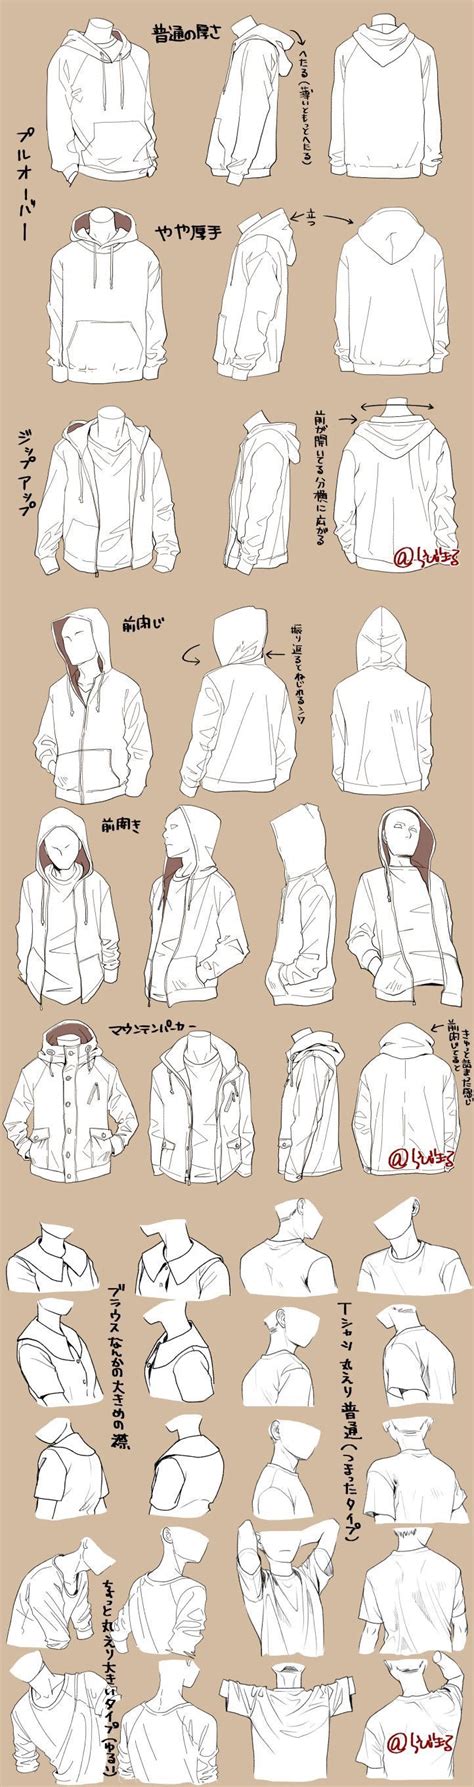 Useful drawing references and sketches for beginner artists. Folds Hoodie Shirt - Art Tutorial , #Art #Folds #Hoodie #SHIRT #tutorial | Como dibujar ropa ...